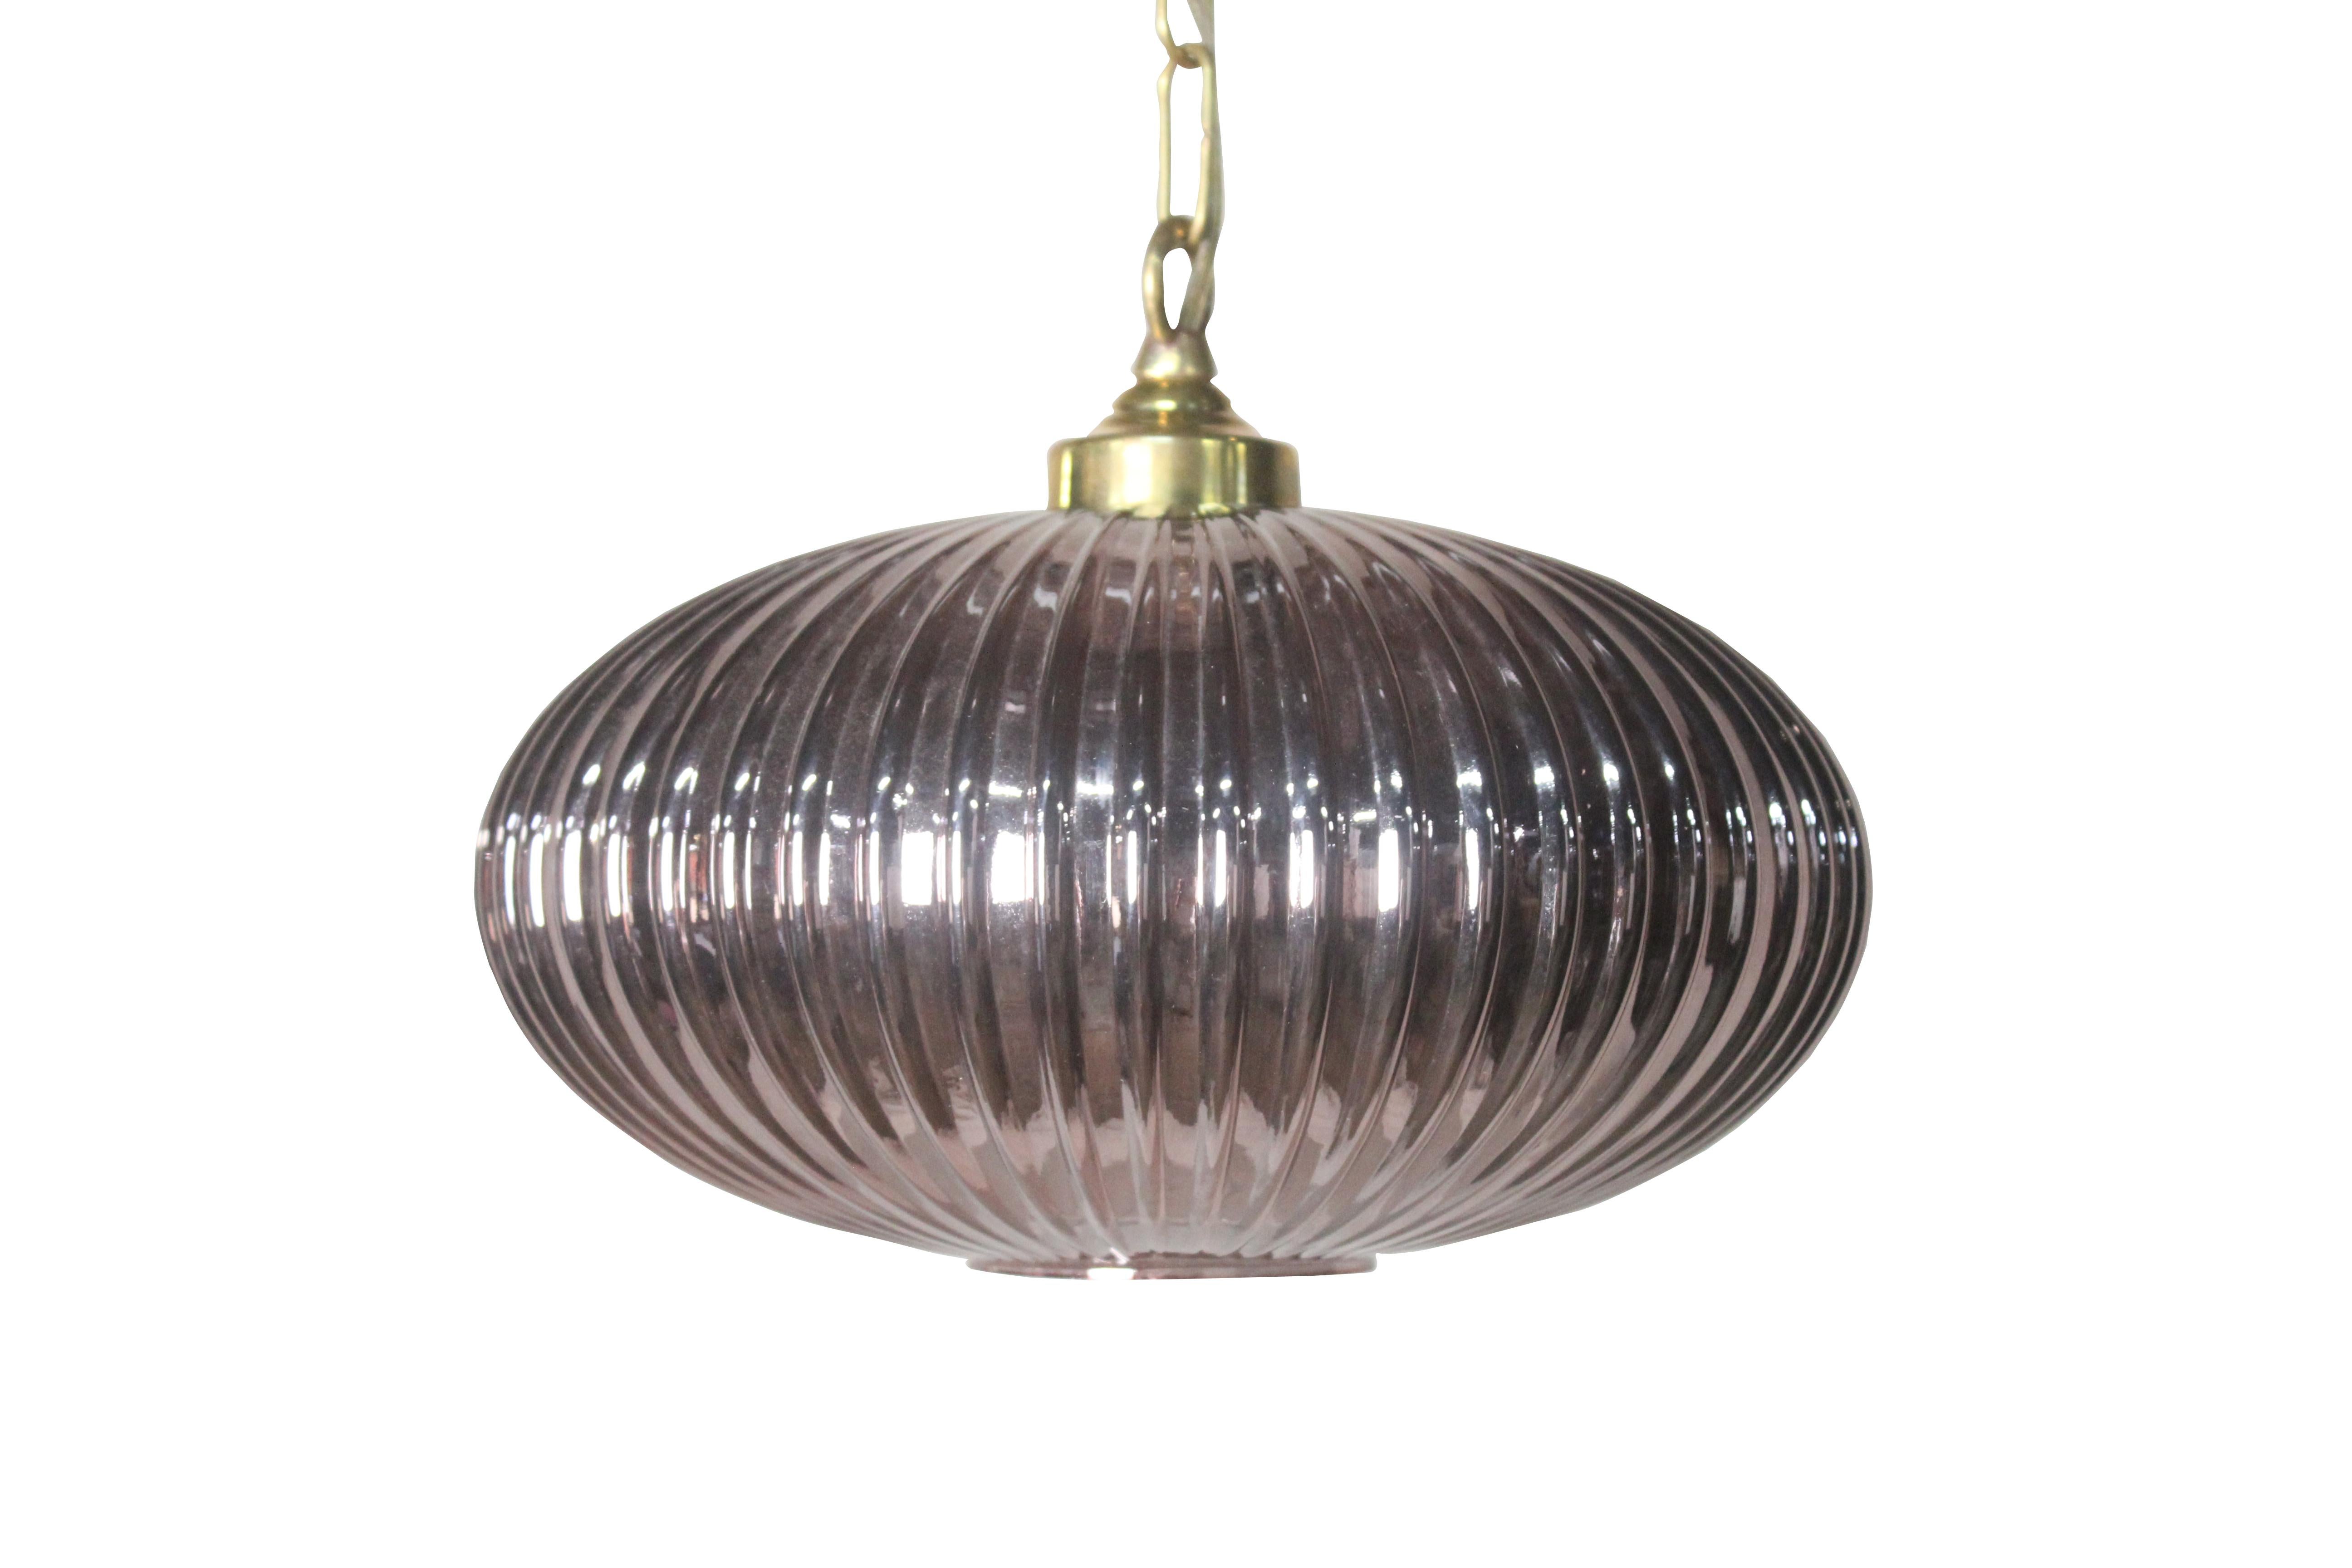 Pair of Mid-Century Modern Pale Amethyst Ribbed Glass Pendant Lights In Excellent Condition For Sale In Nantucket, MA